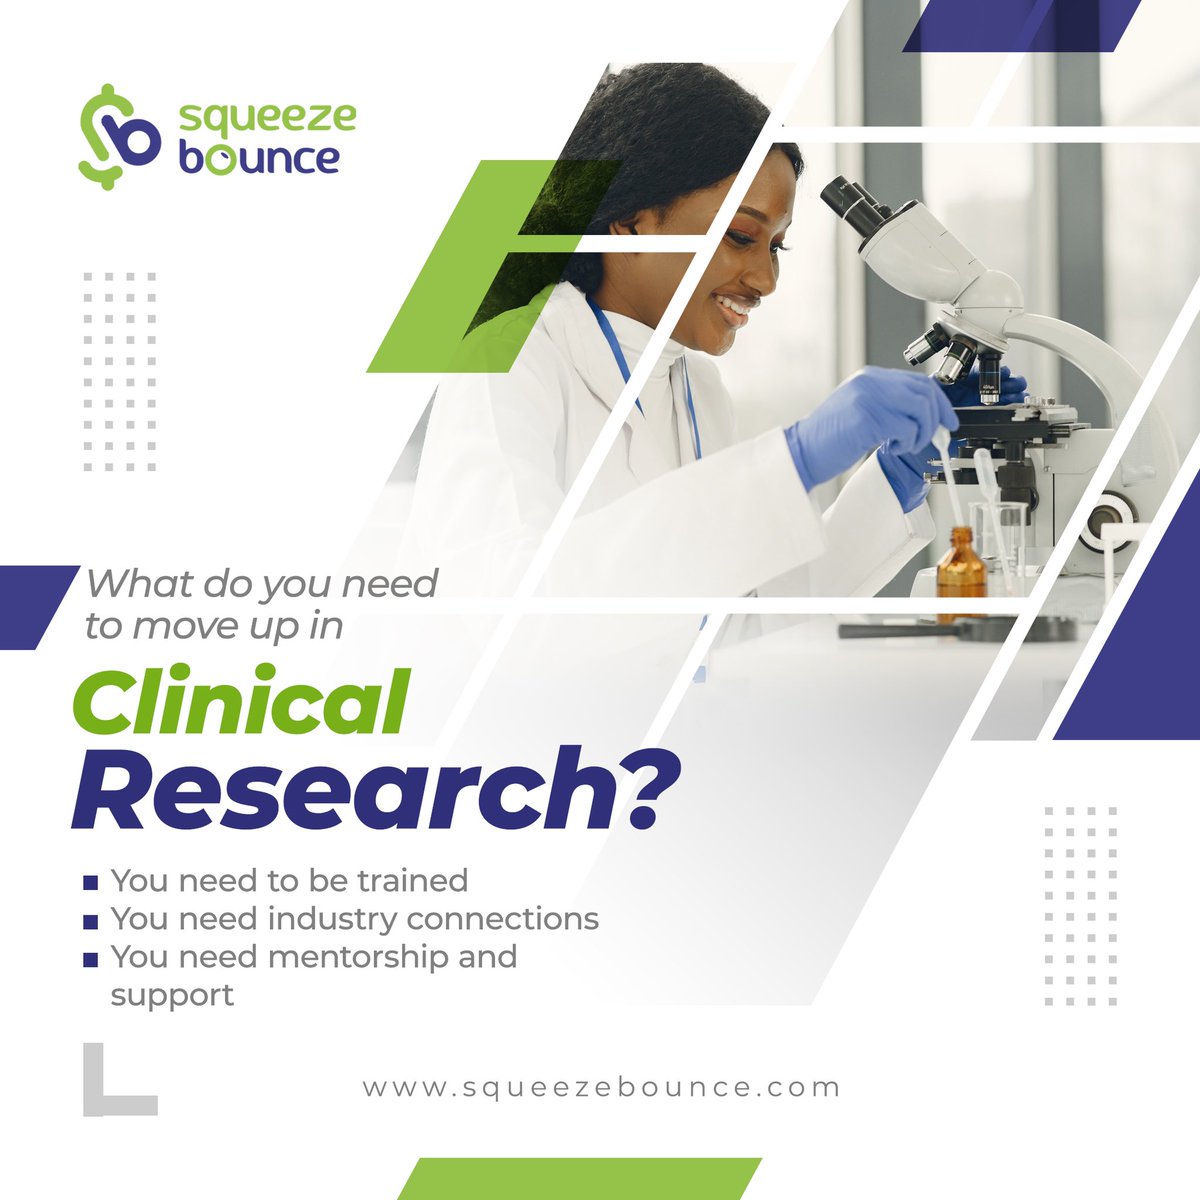 Get hired fast with our professional clinical research training and development programme👩‍⚕️🩺

Visit squeezebounce.com to get started

#clinicaltrials #Clinicalresearch #clinicaltrialresults